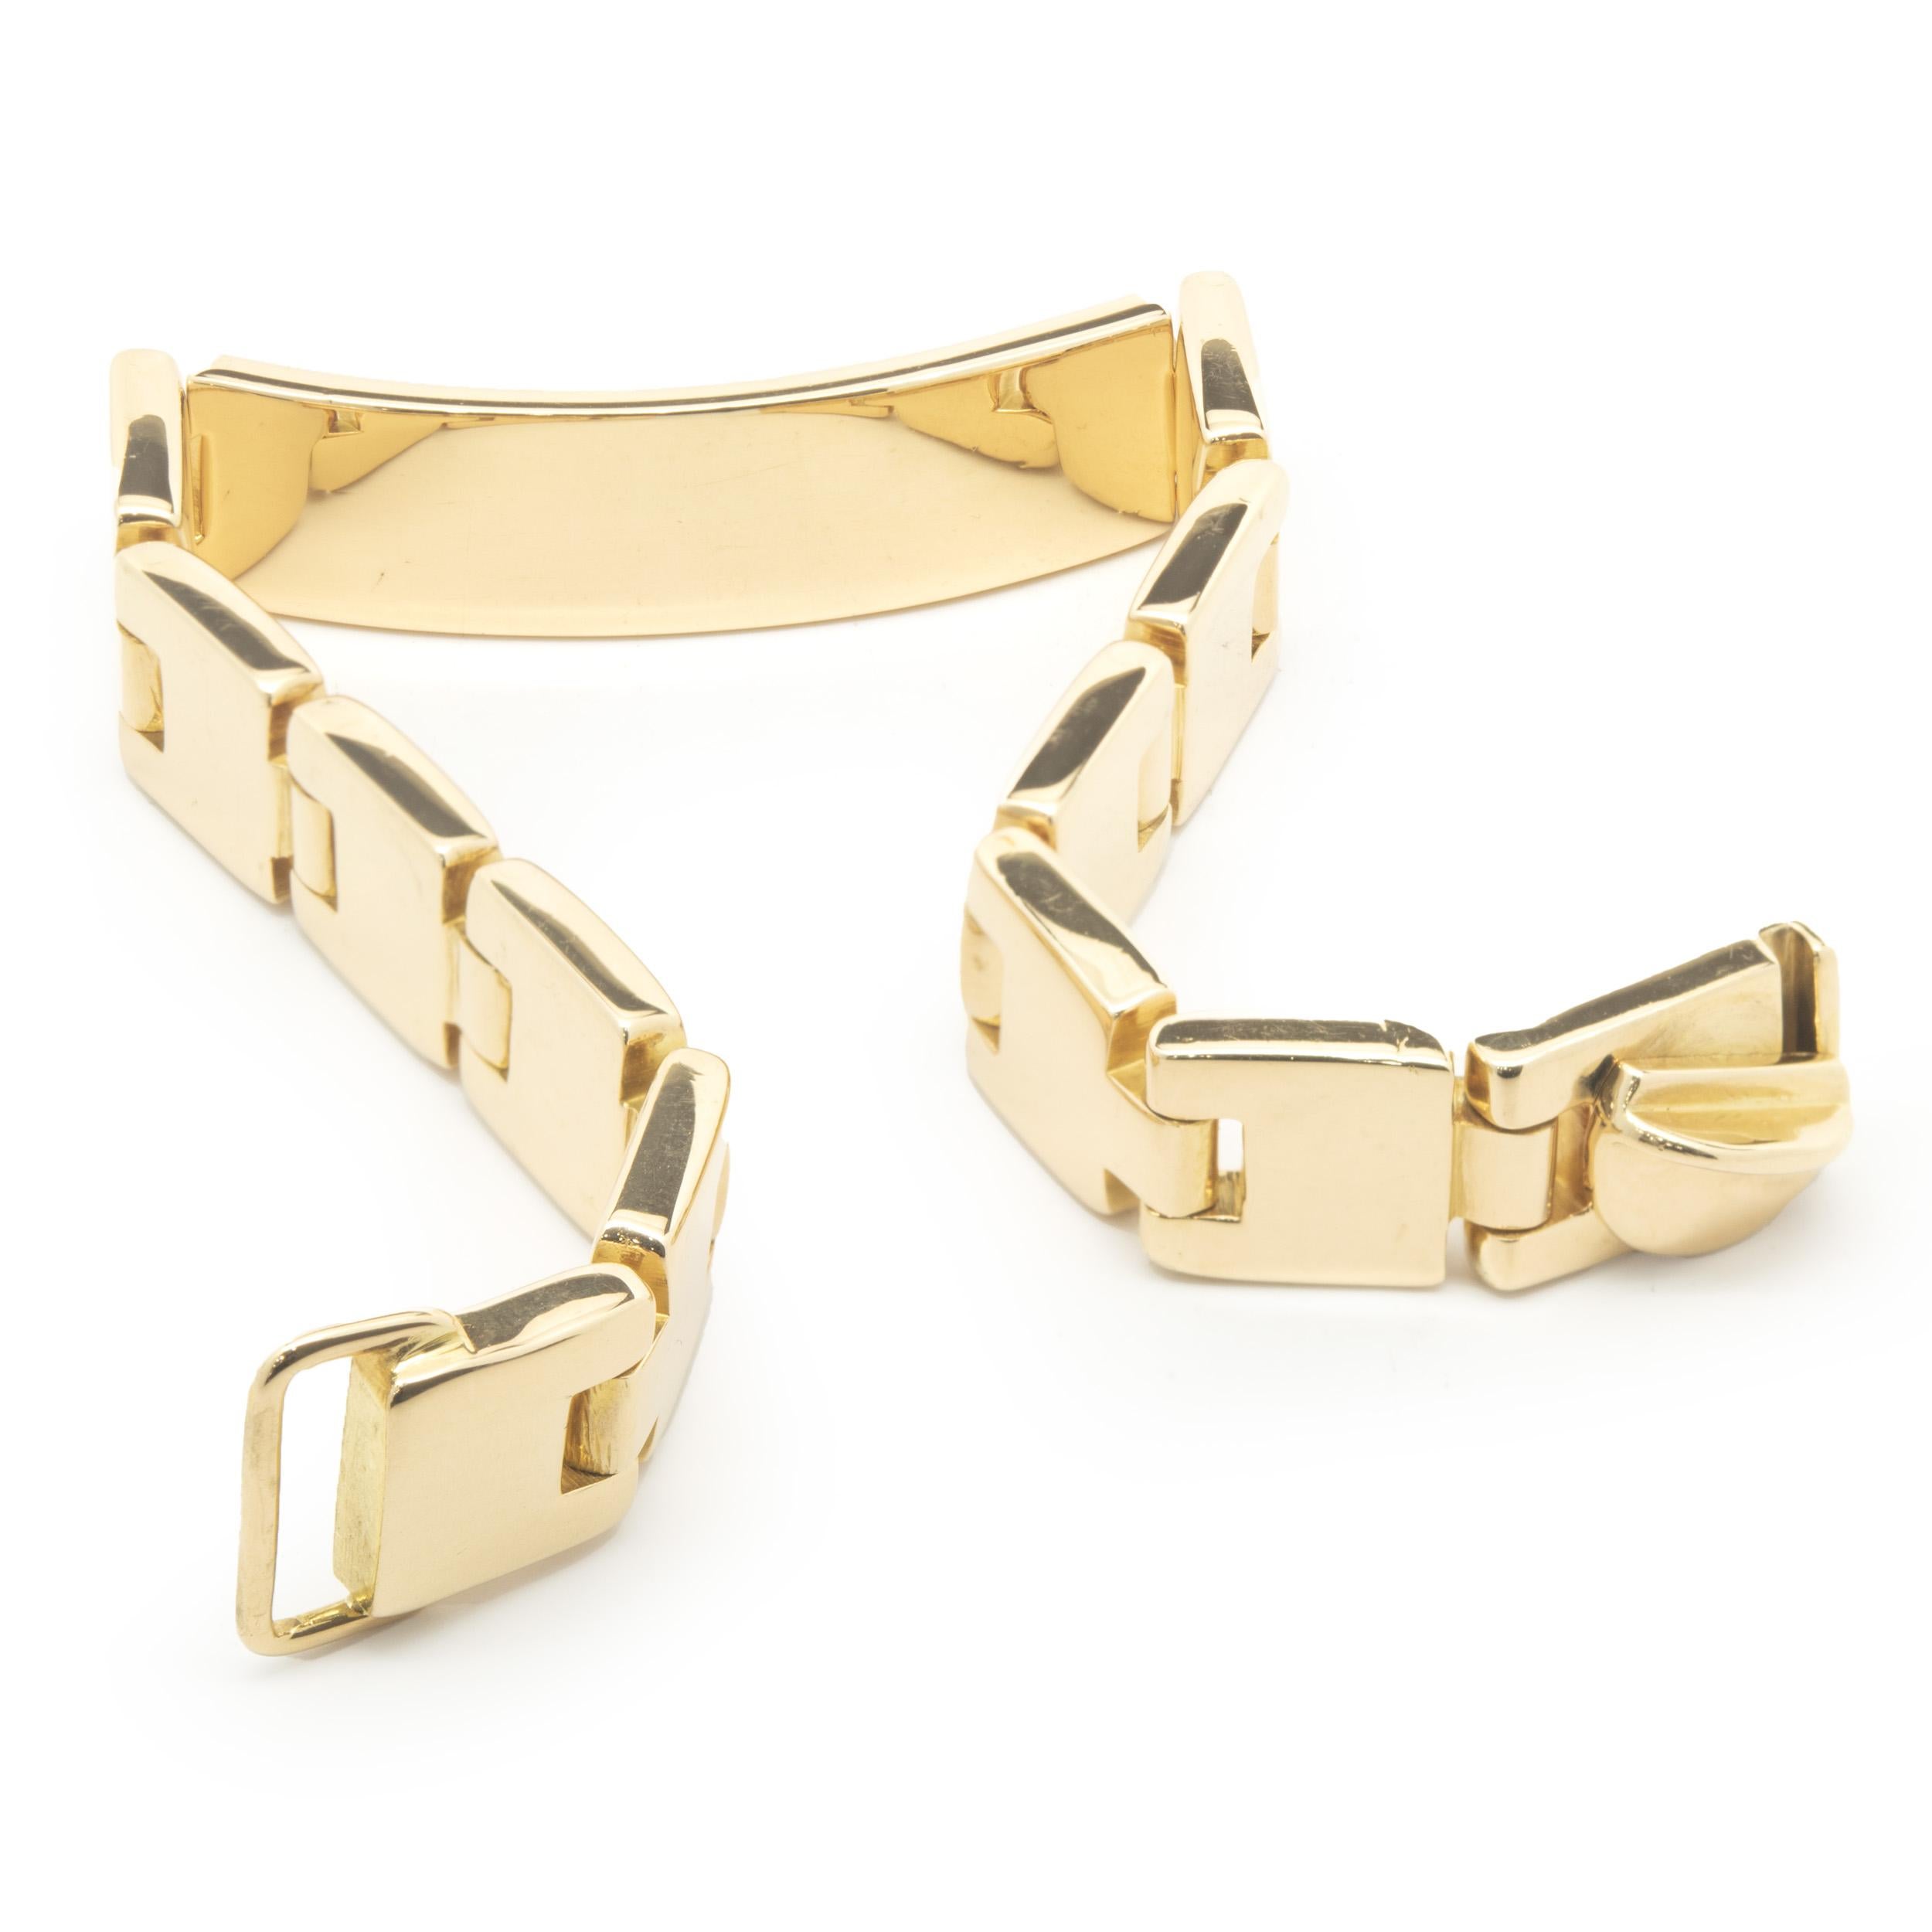 Gucci 18 Karat Yellow Gold ID Bracelet In Excellent Condition For Sale In Scottsdale, AZ